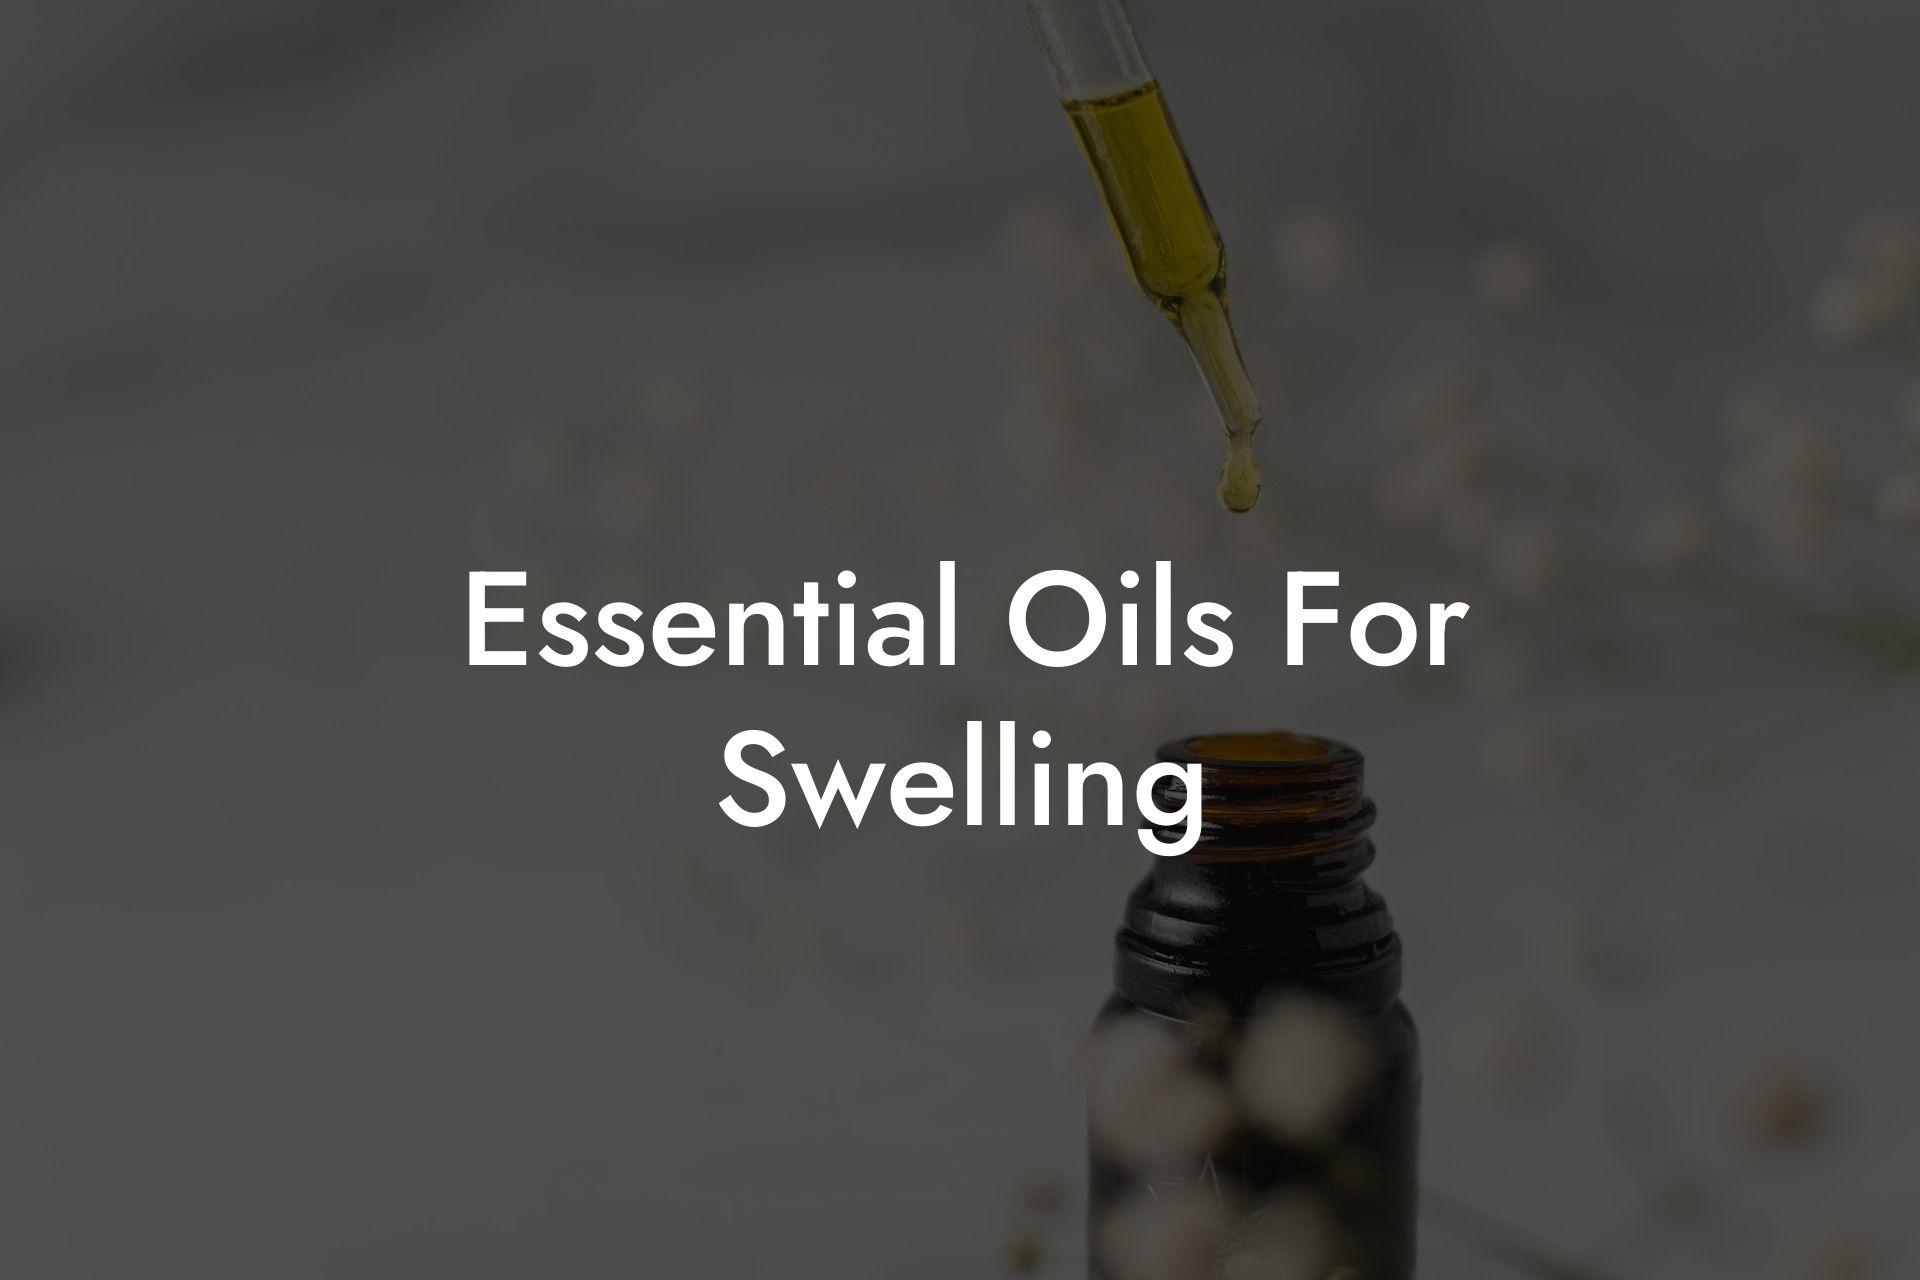 Essential Oils For Swelling